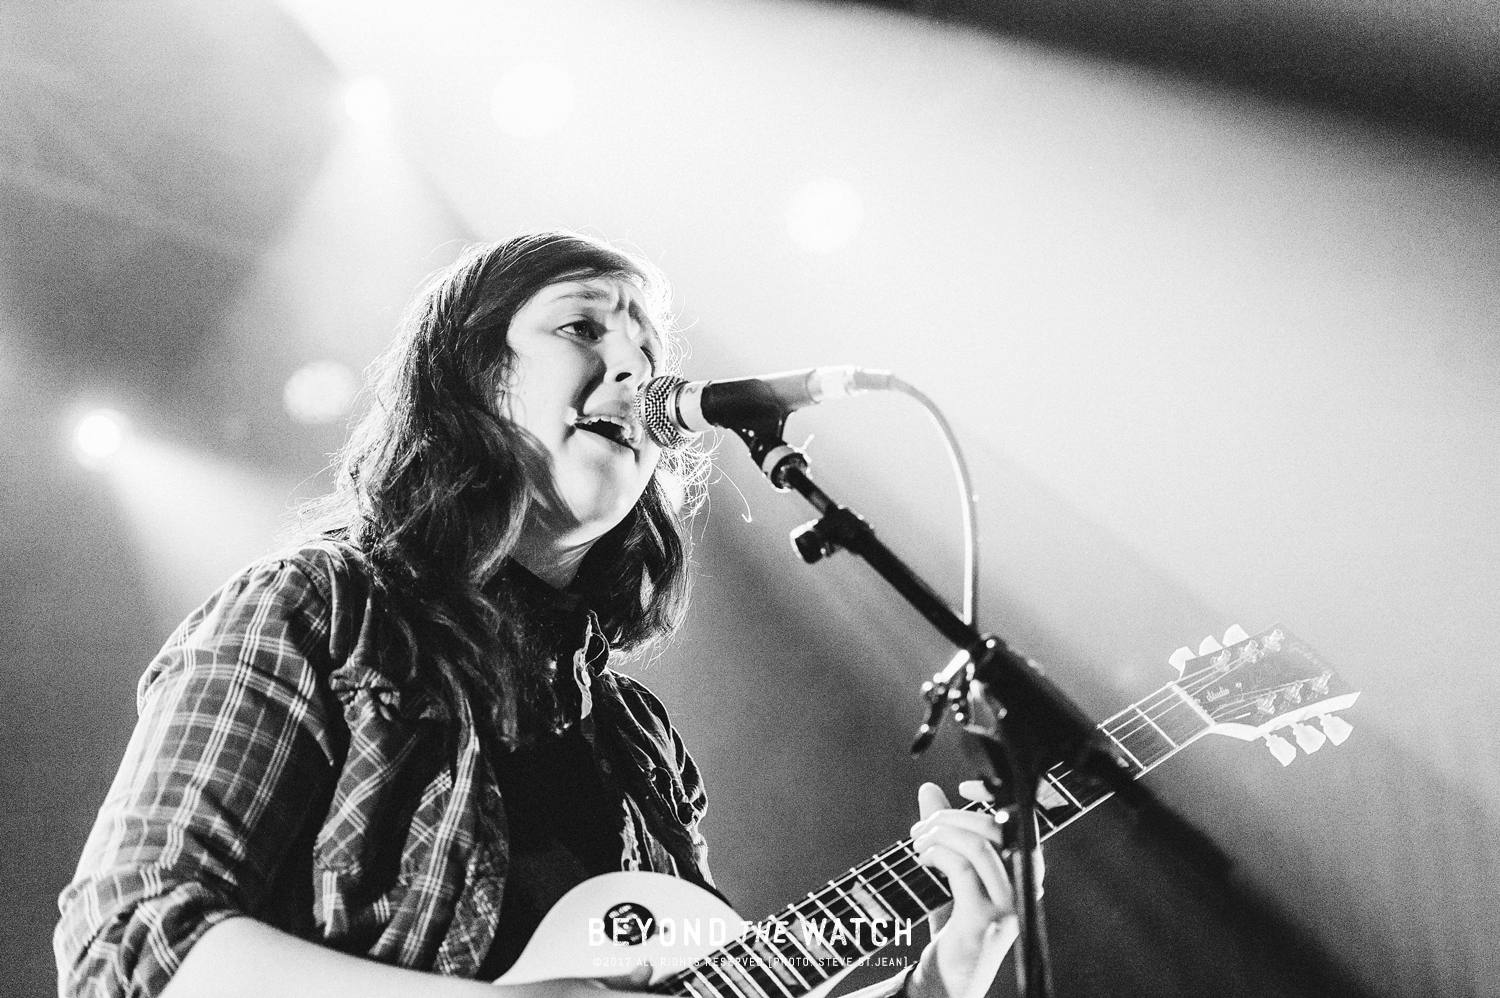  Lucy Dacus at The Opera House 